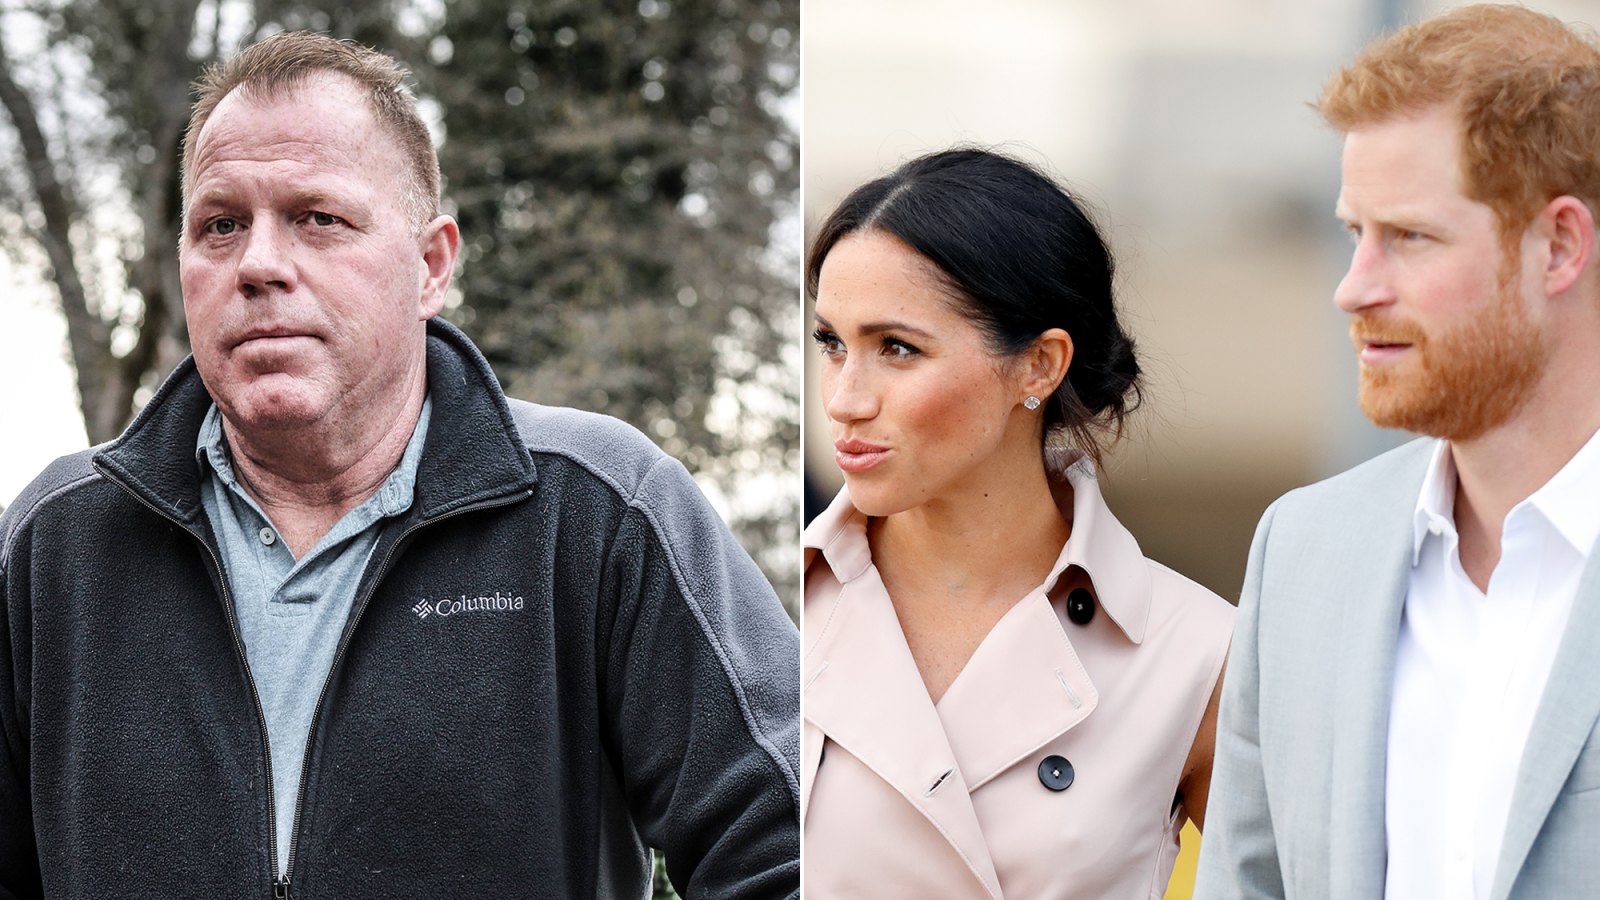 Duchess Meghan’s Brother Thomas Markle Jr. Blames Prince Harry for Family Drama